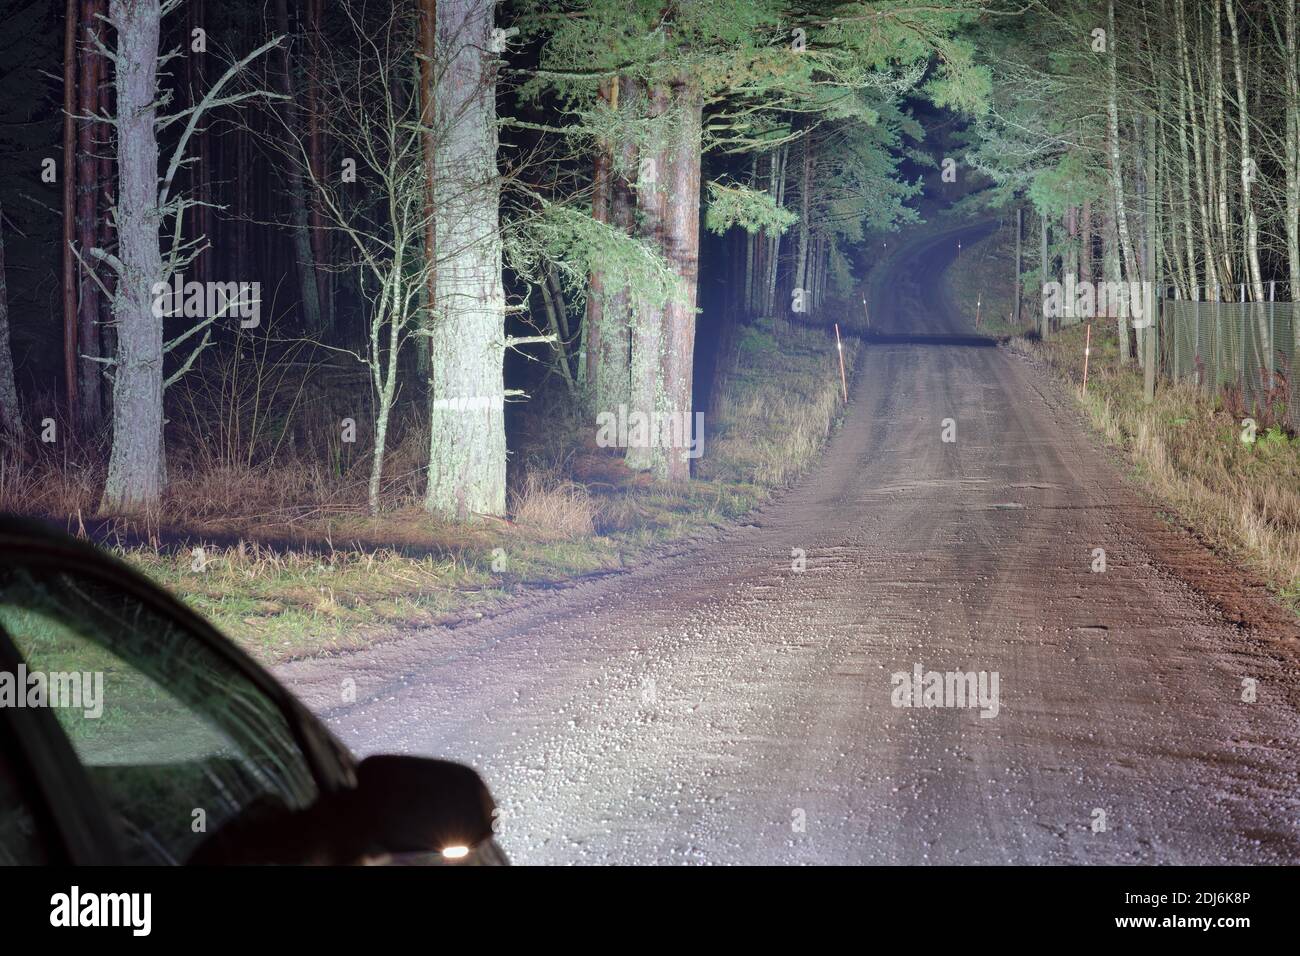 STEDI ST4K LED ramp lighting a forest road ahead of a car during nighttime  Stock Photo - Alamy